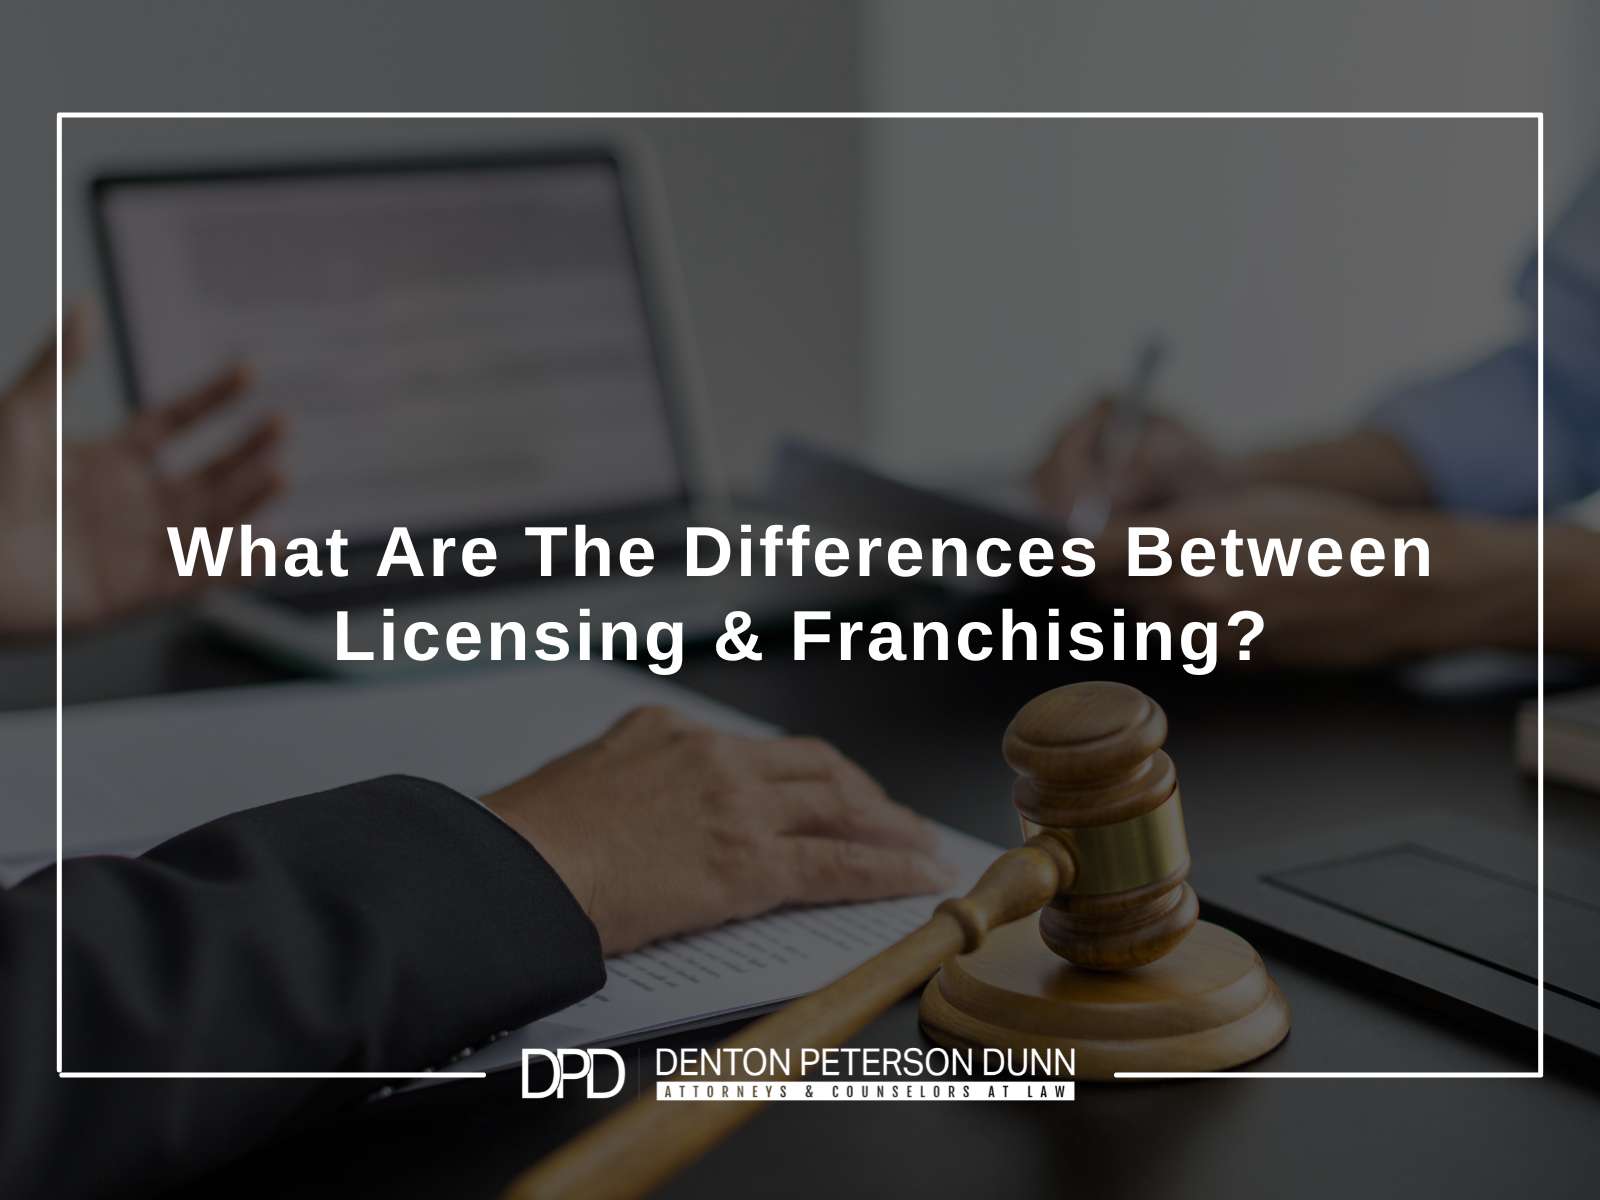 What Are The Differences Between Licensing & Franchising